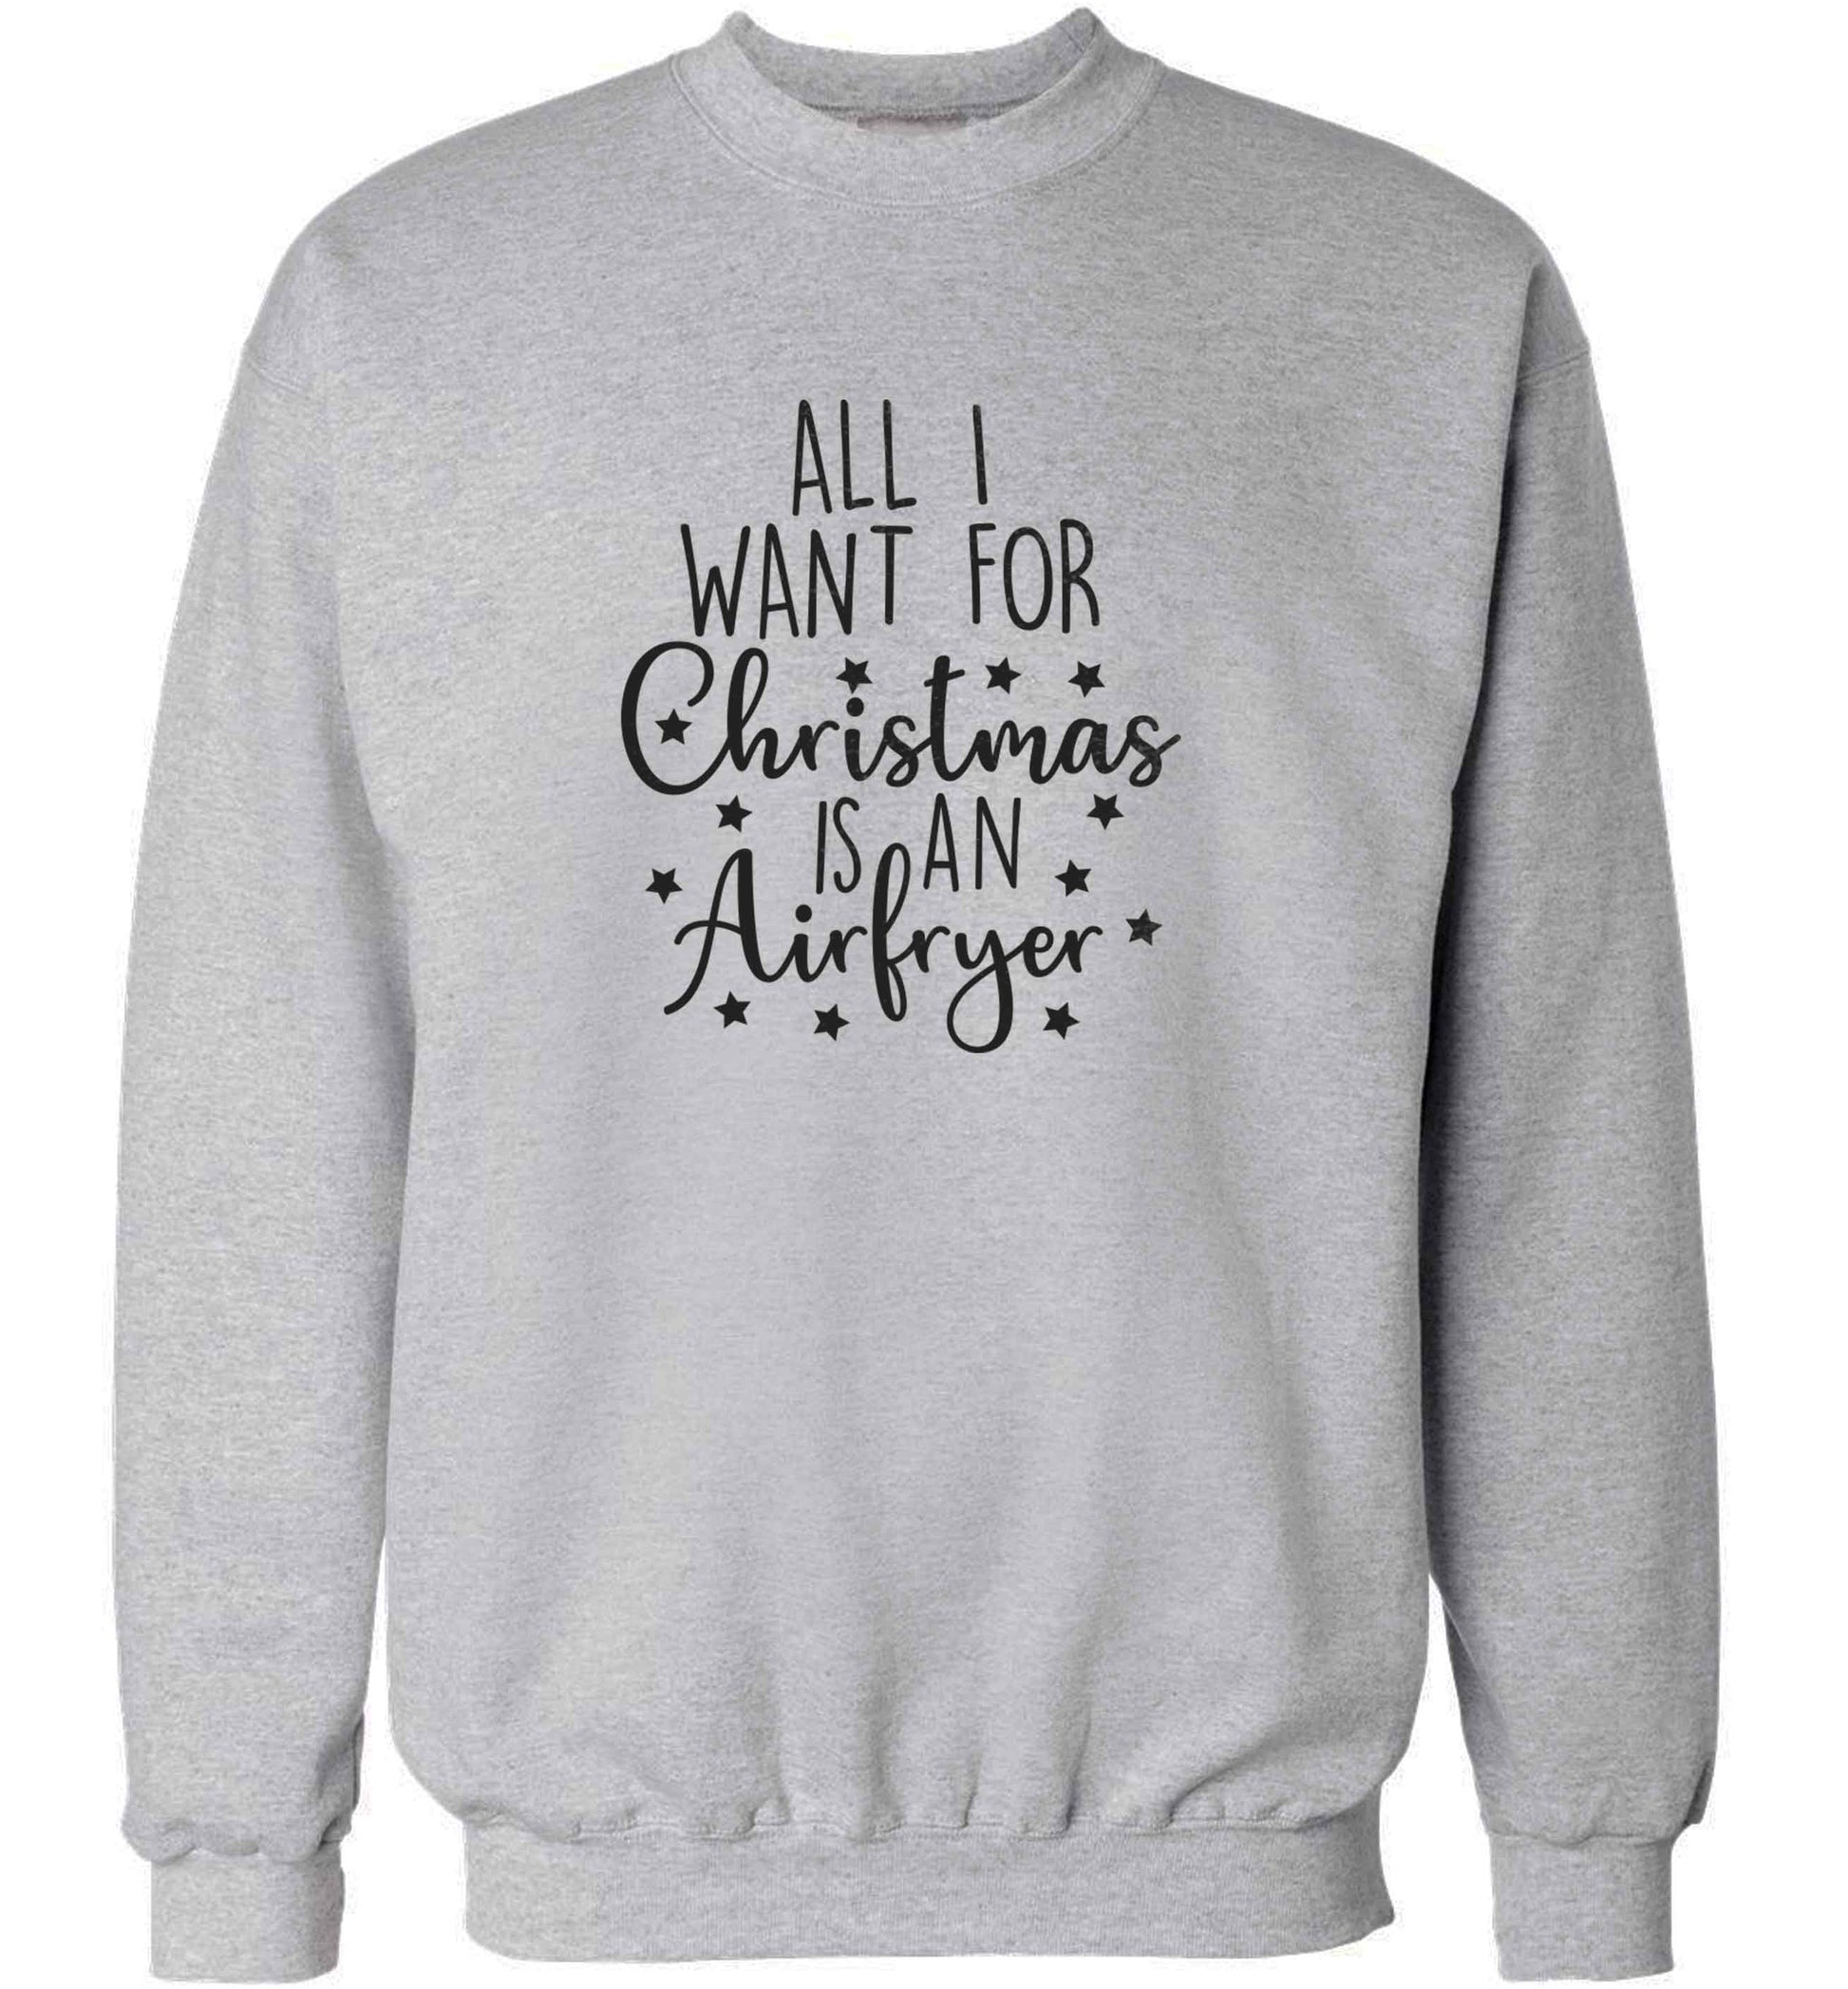 All I want for Christmas is an airfryeradult's unisex grey sweater 2XL